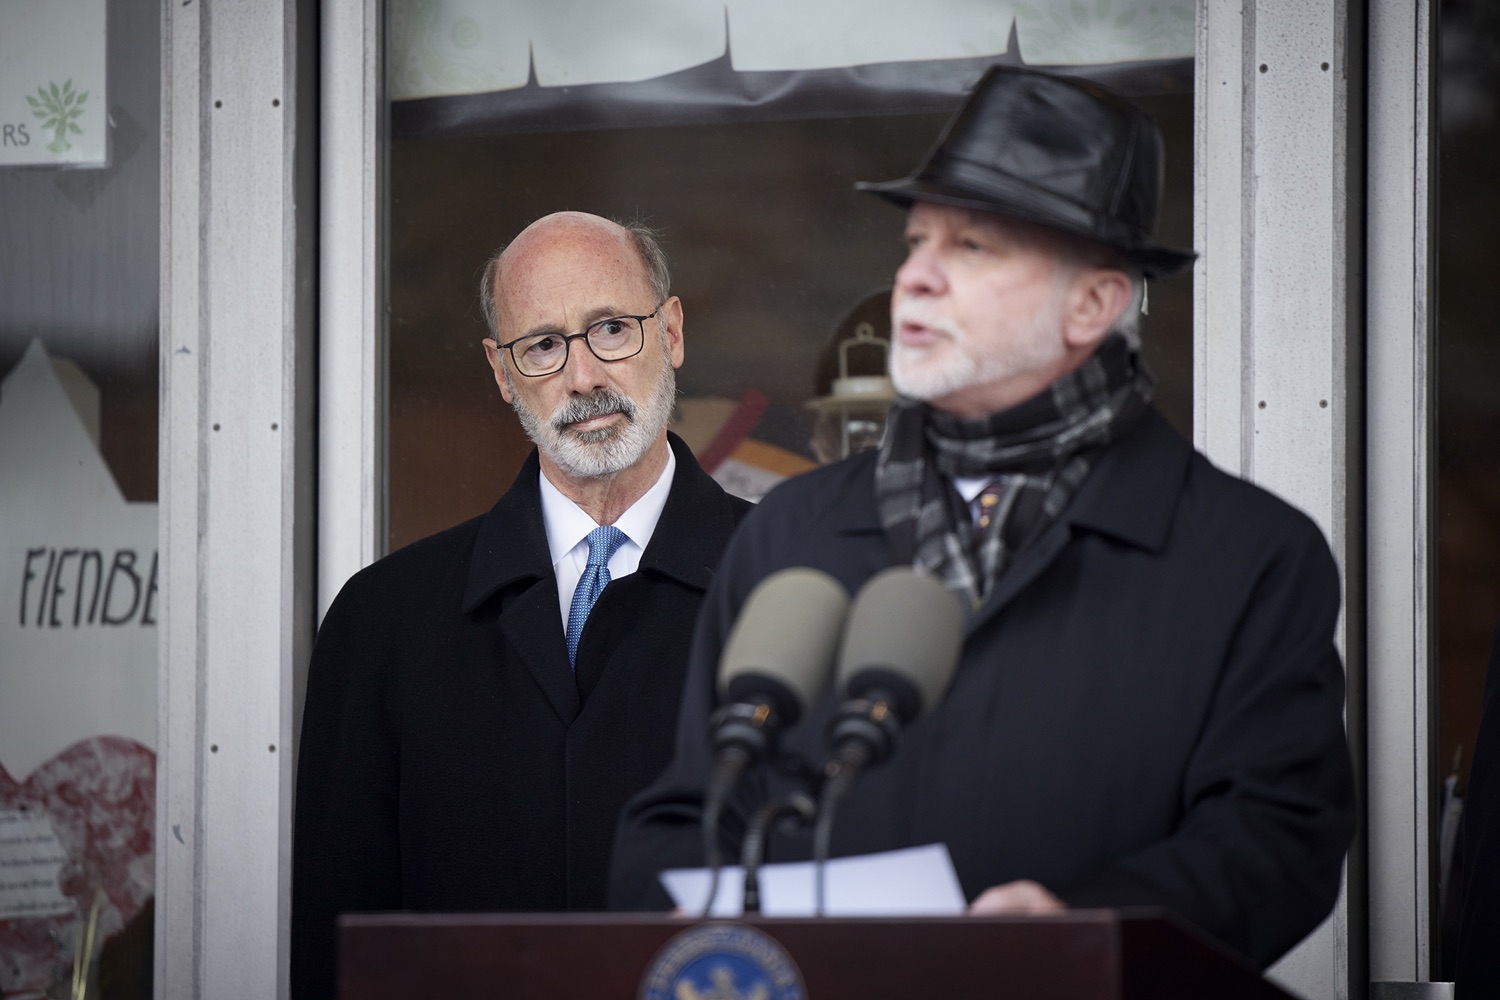 Pennsylvania Governor Tom Wolf listens as Rabbi Jeffrey Myers speaks with the press.  Governor Tom Wolf visited the Tree of Life in Pittsburgh today to announce $6.6 million in state funding to support the rebuilding and reimagining of the synagogue. The governor was joined by Rabbi Jeffrey Myers, Senate Democratic Leader Jay Costa and members of the Tree of Lifes REMEMBER. REBUILD. RENEW campaign which will transform the site of the worst antisemitic attack in U.S. history into a new place of hope, remembrance, and education. Pittsburgh, PA - December 6, 2021<br><a href="https://filesource.amperwave.net/commonwealthofpa/photo/20308_gov_treeOfLife_dz_009_copy.jpg" target="_blank">⇣ Download Photo</a>